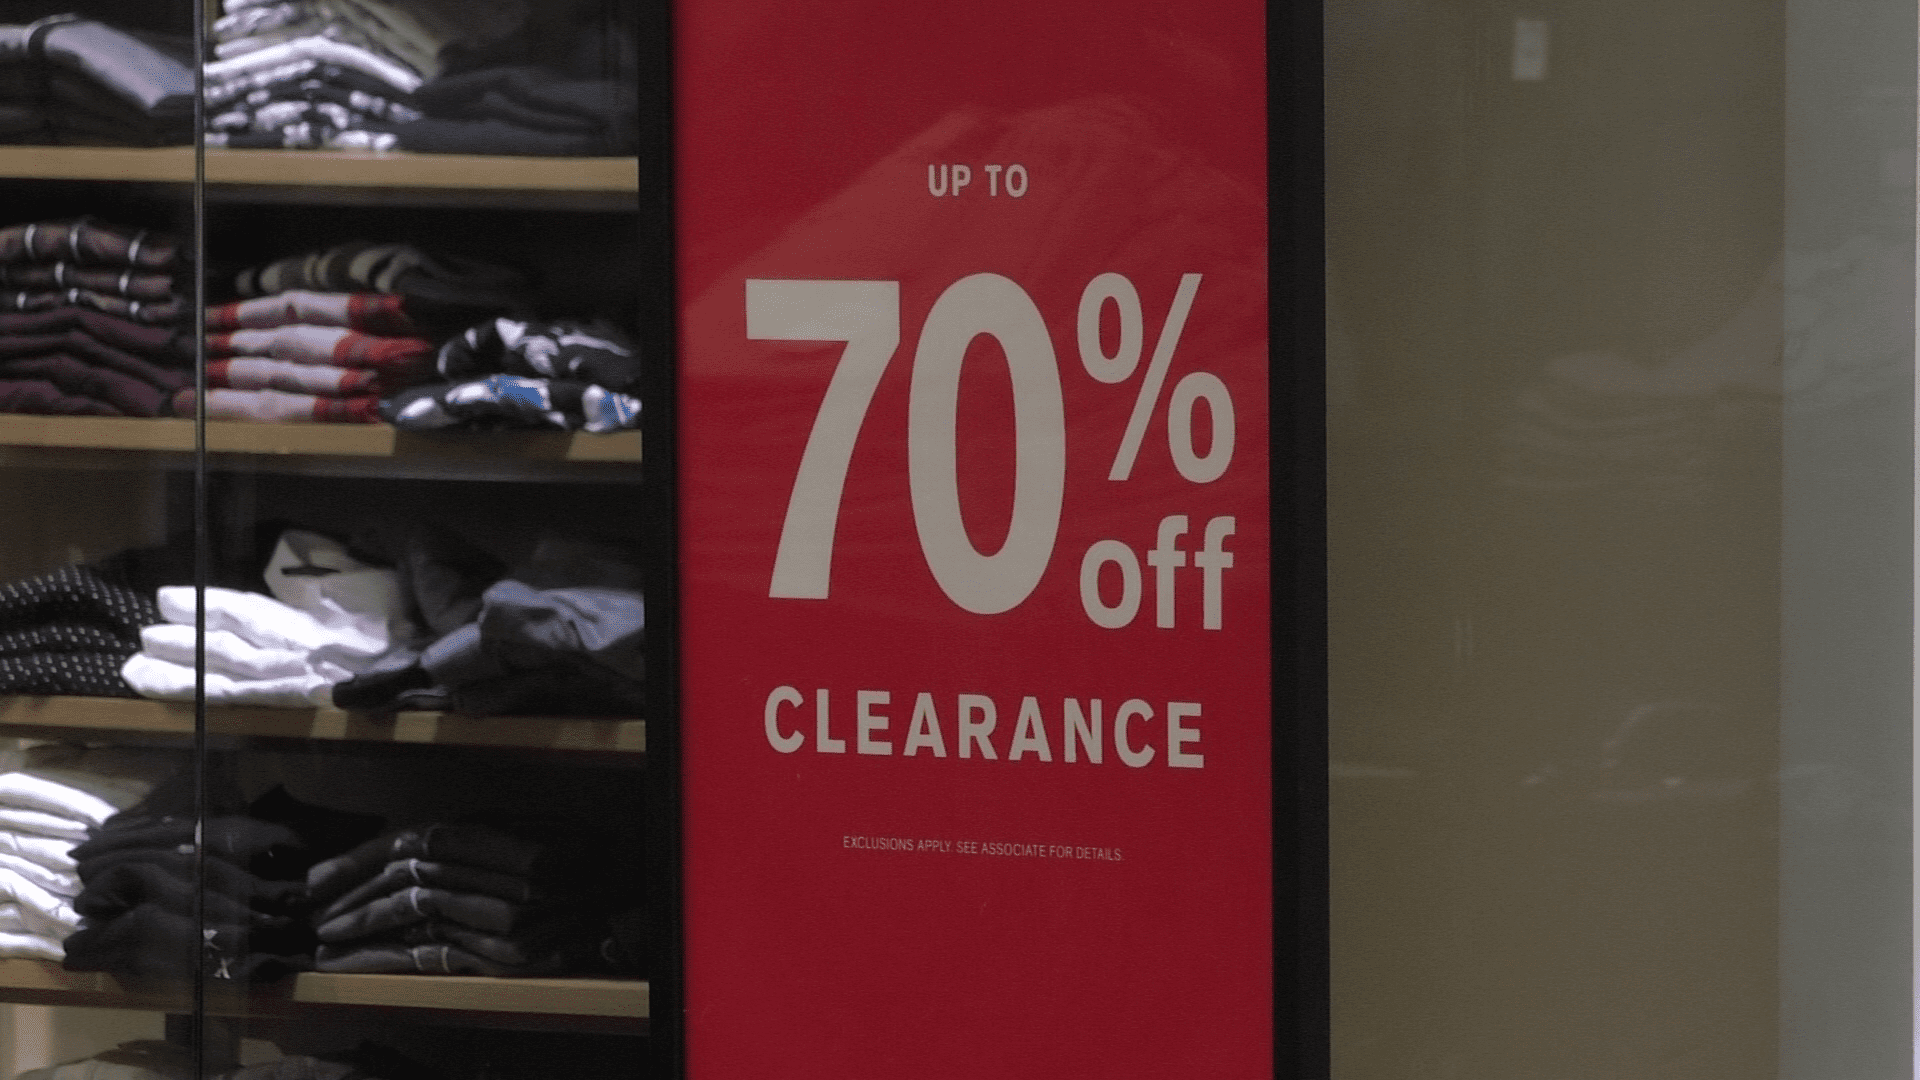 A discount sign in the mall.